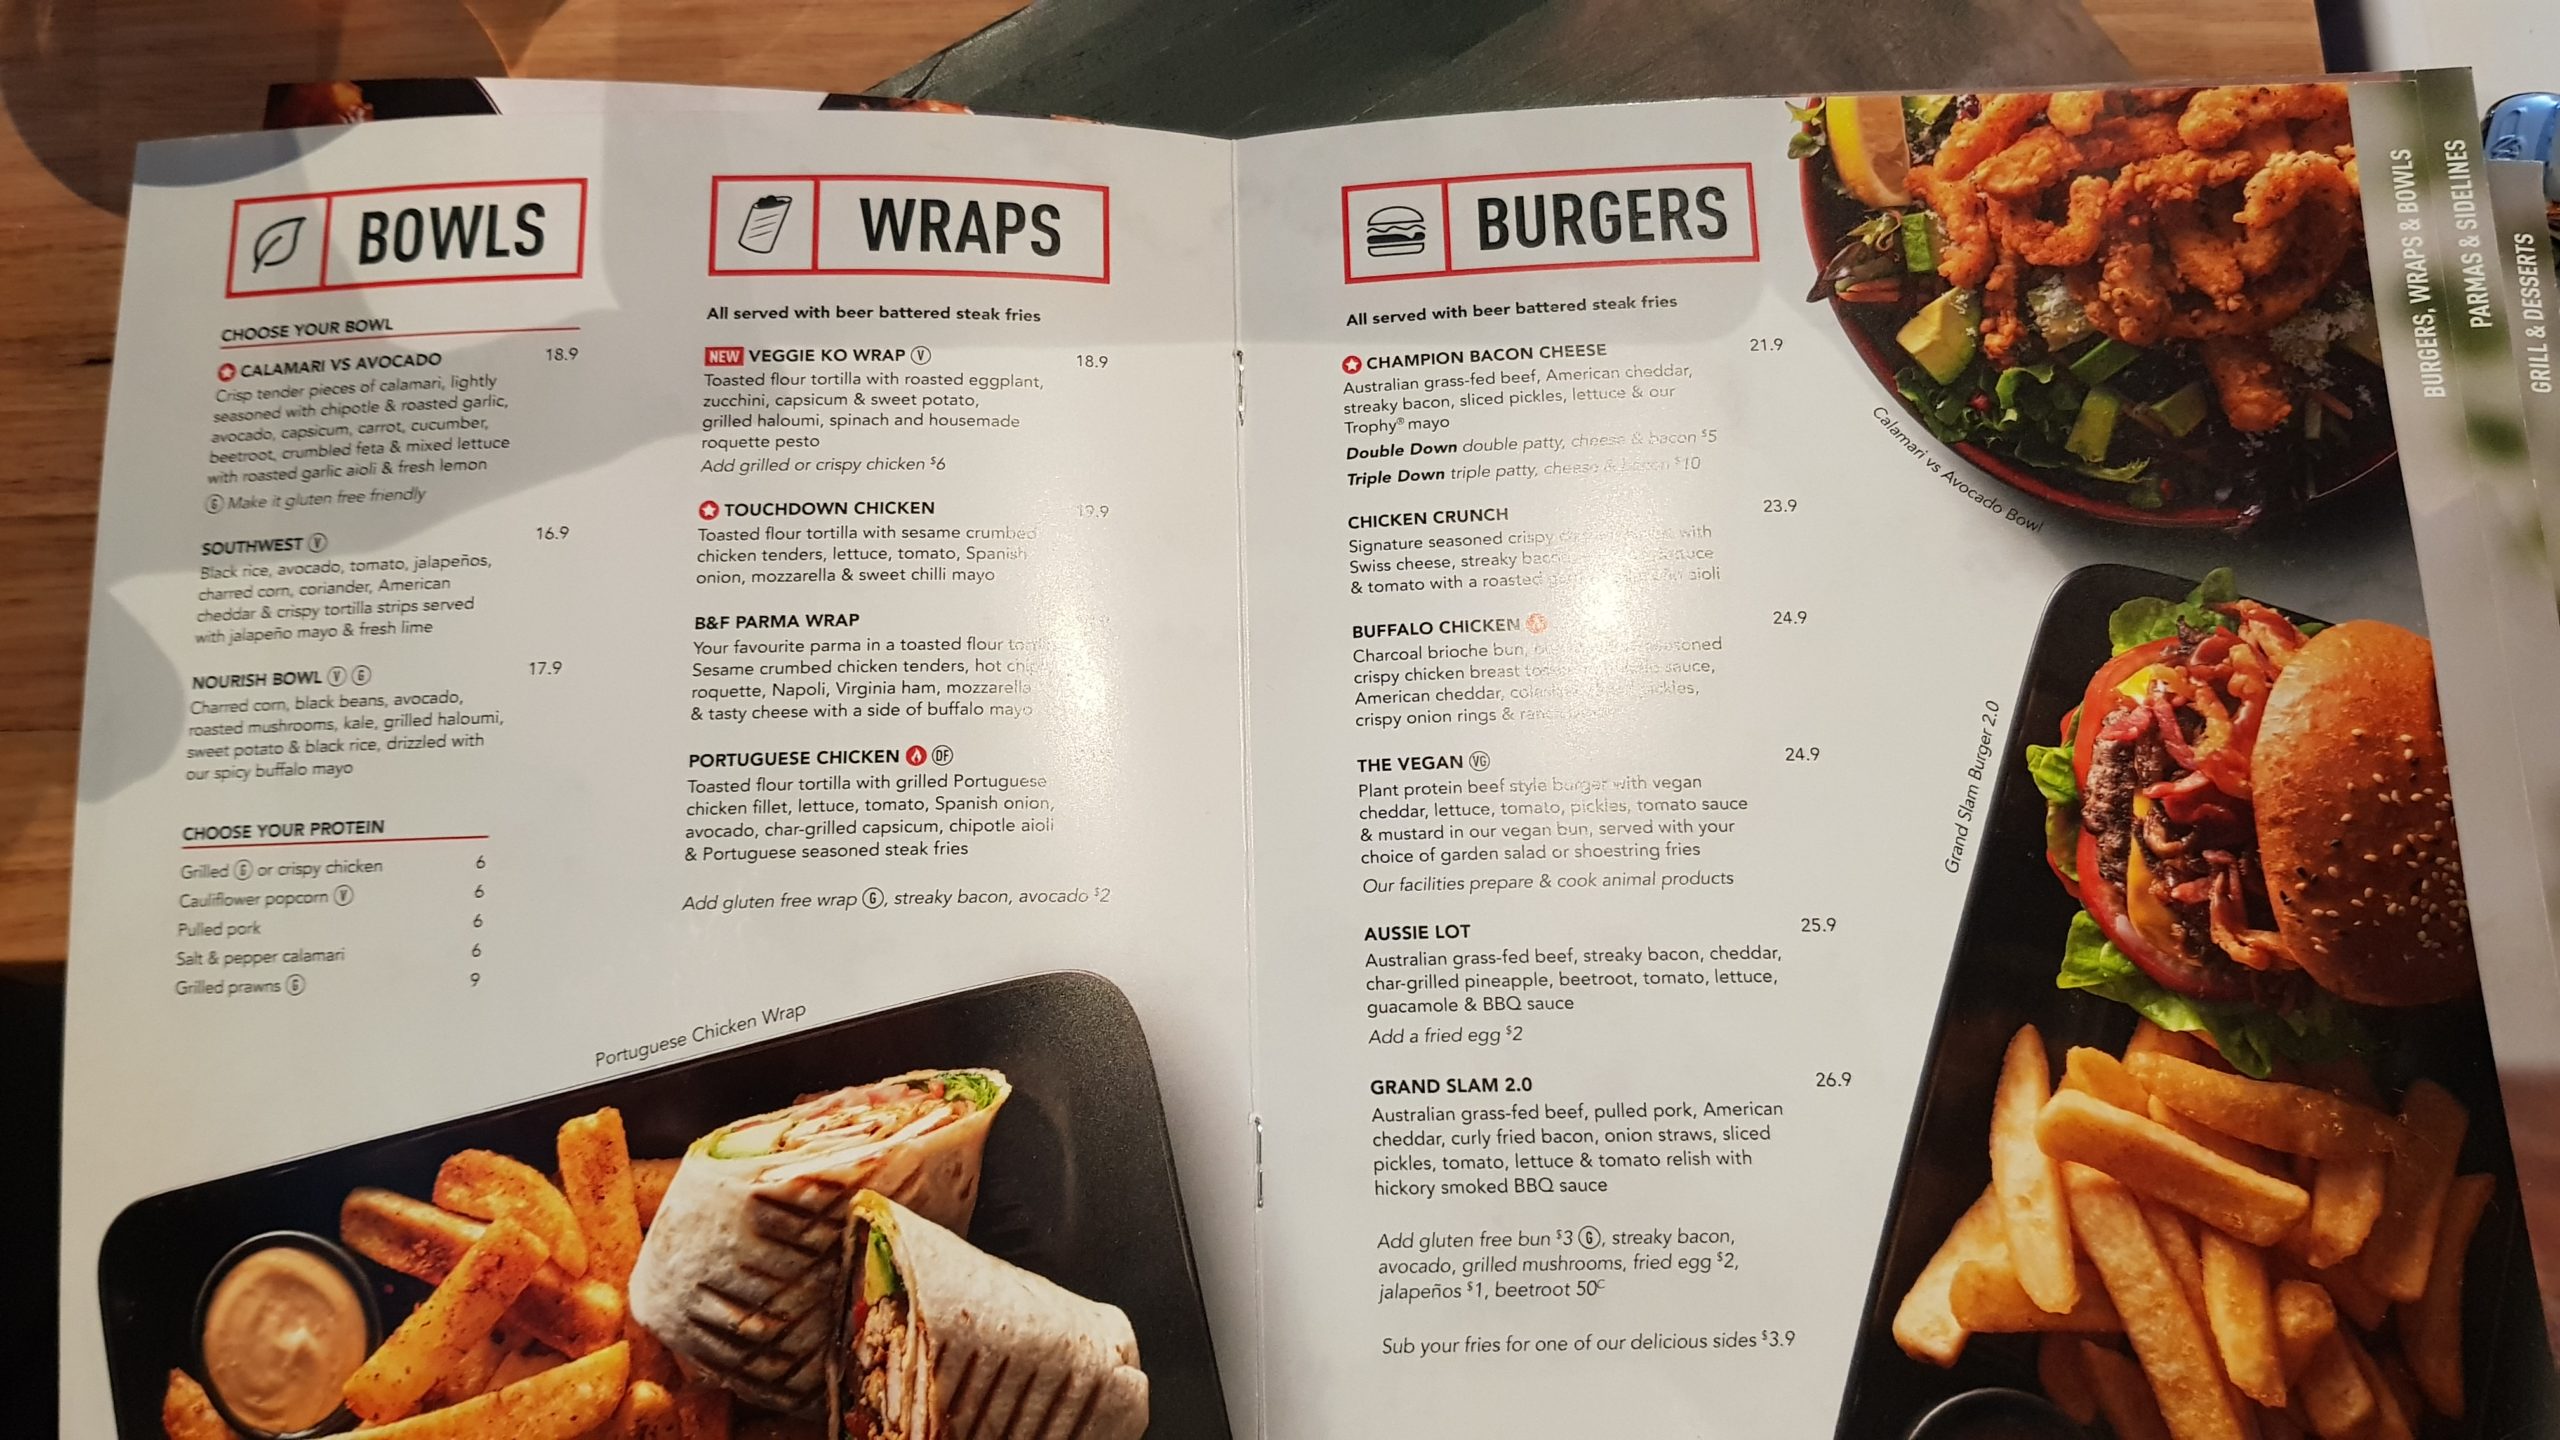 Sporting Globe Bowls, Wraps and Burgers